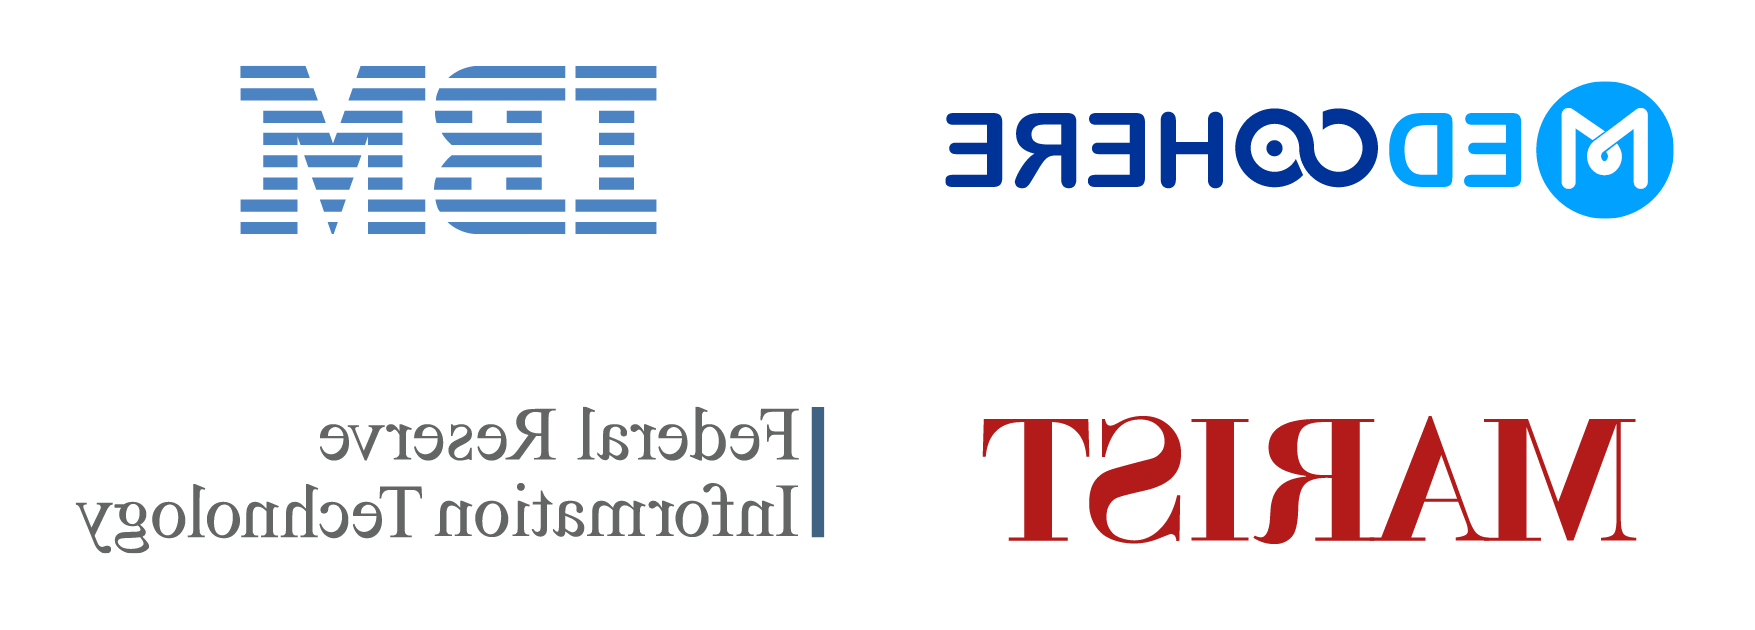 Logos of Computer Science career destinations: MedCohere, IBM, Marist College, and Federal Reserve Information Technology